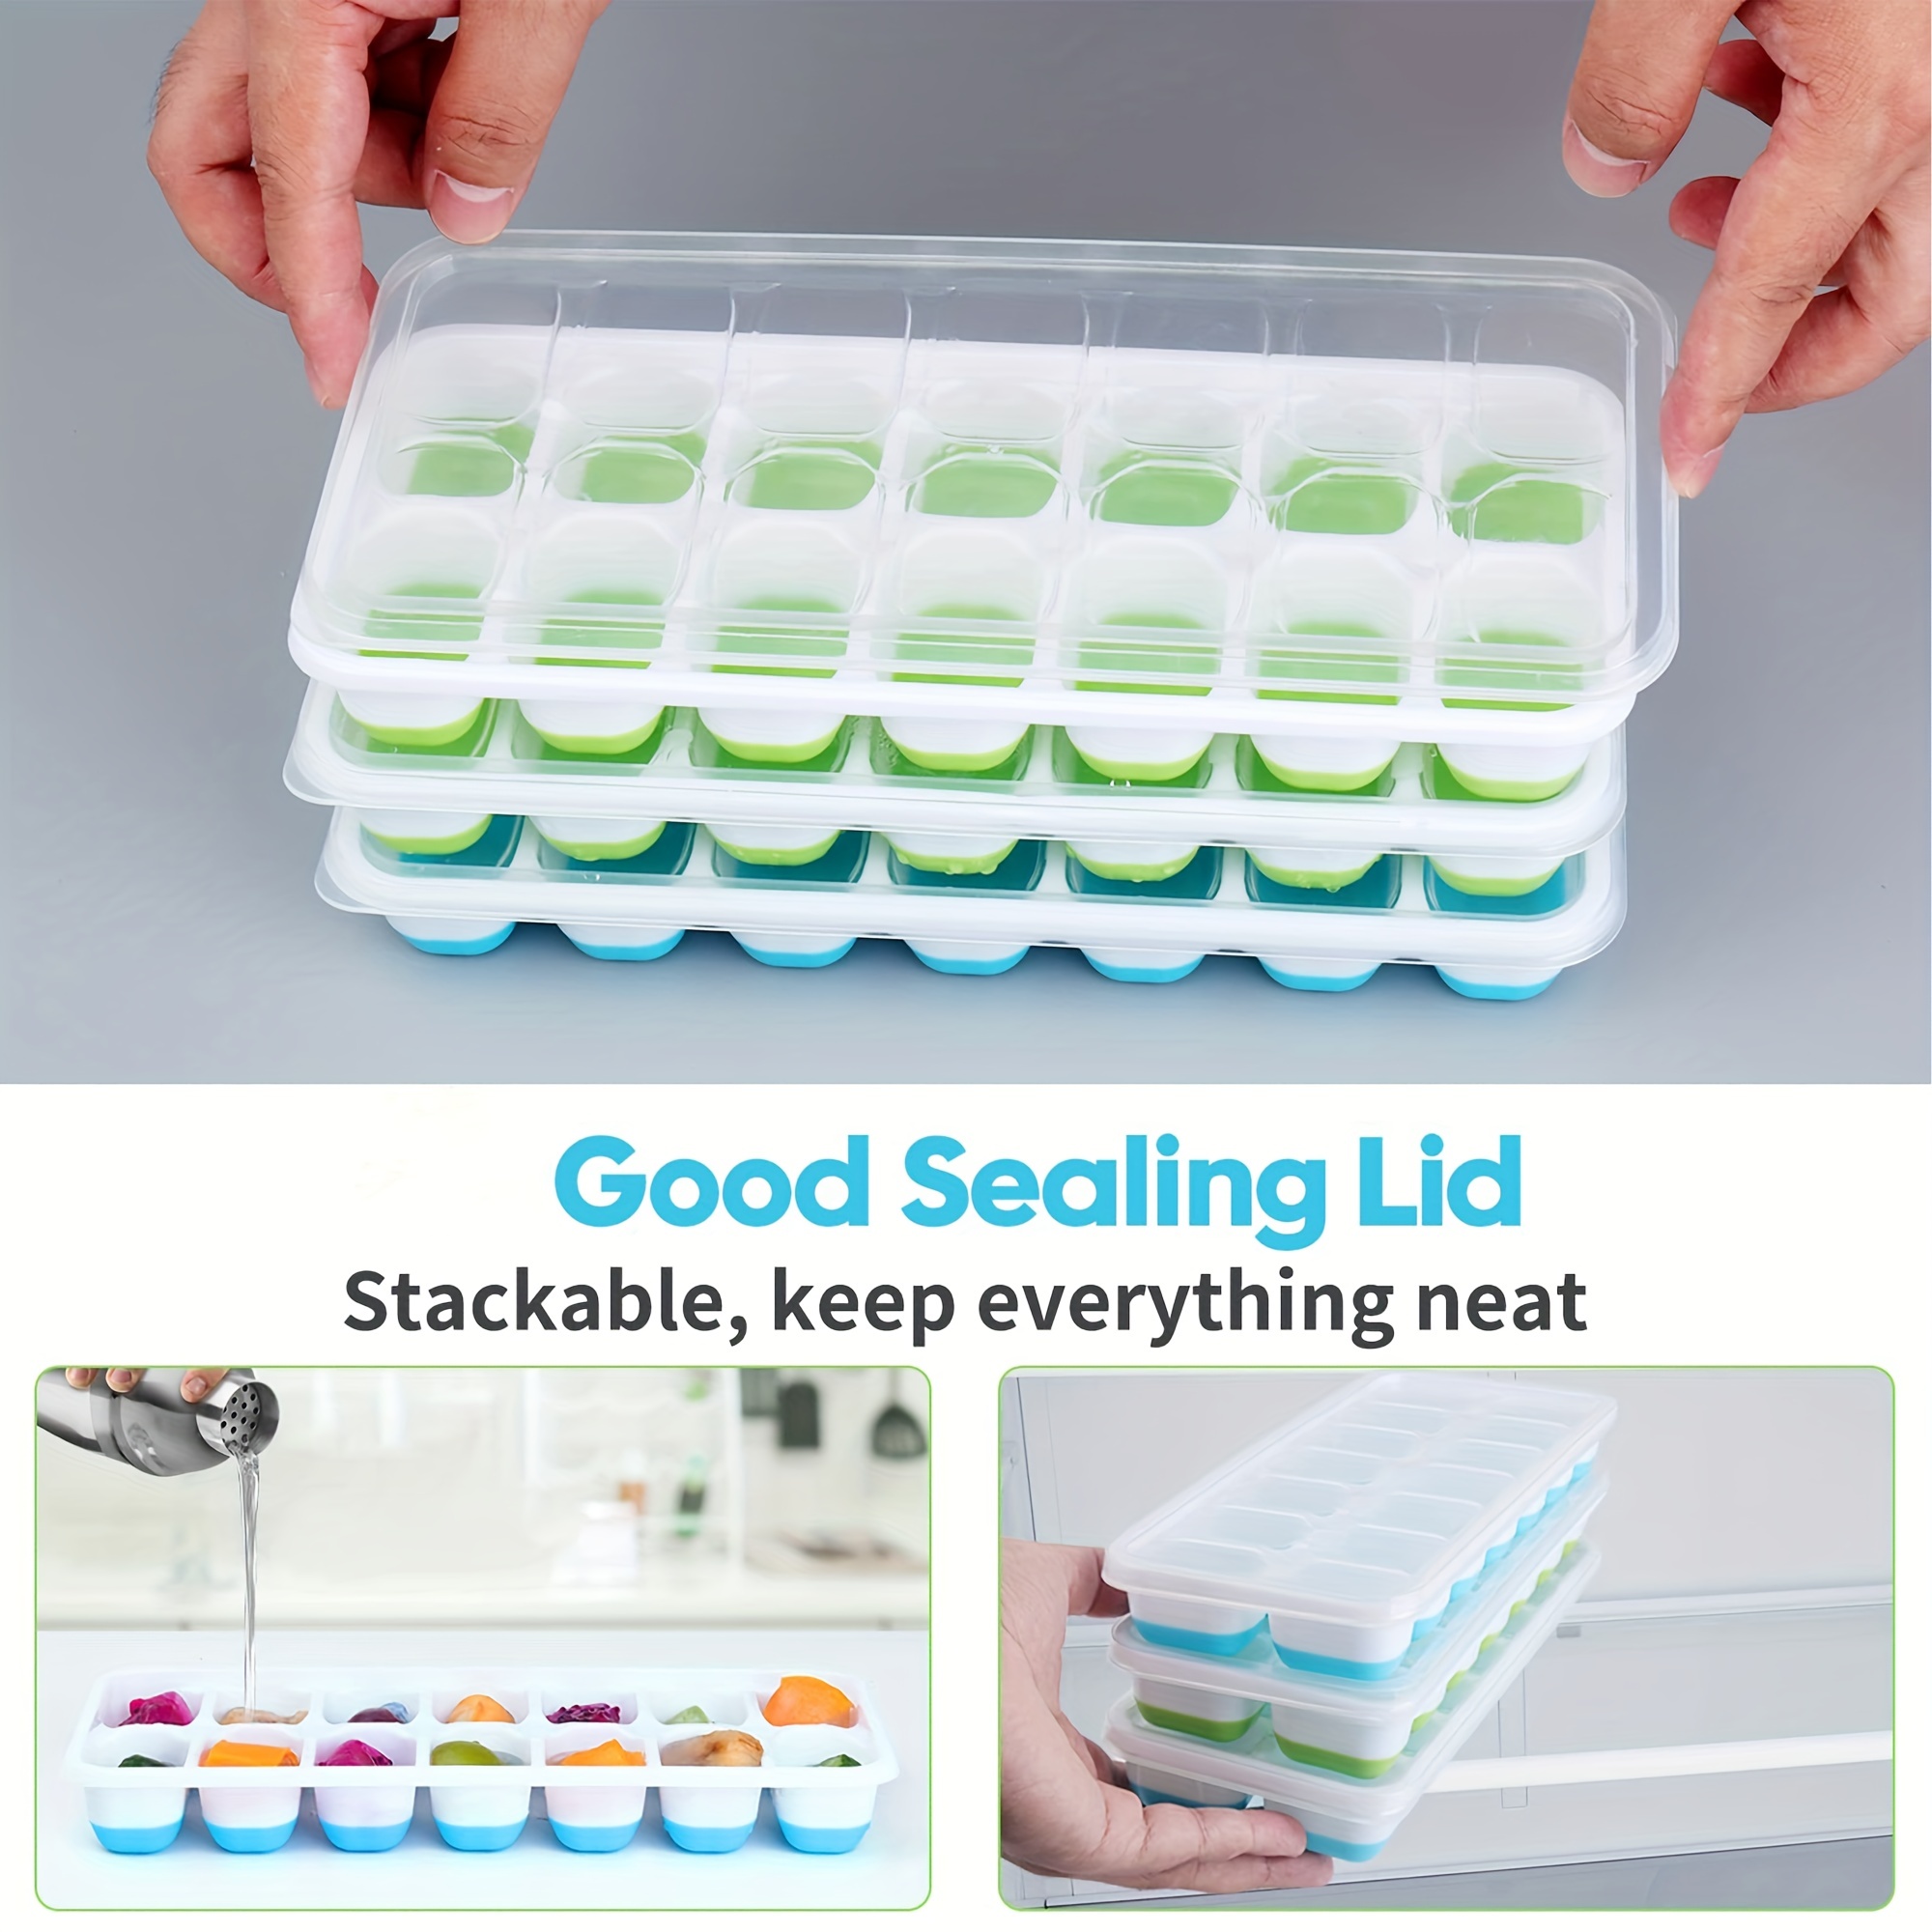 Ice Cube Tray Organization - Clever Solutions for Small Items - The Crazy  Craft Lady